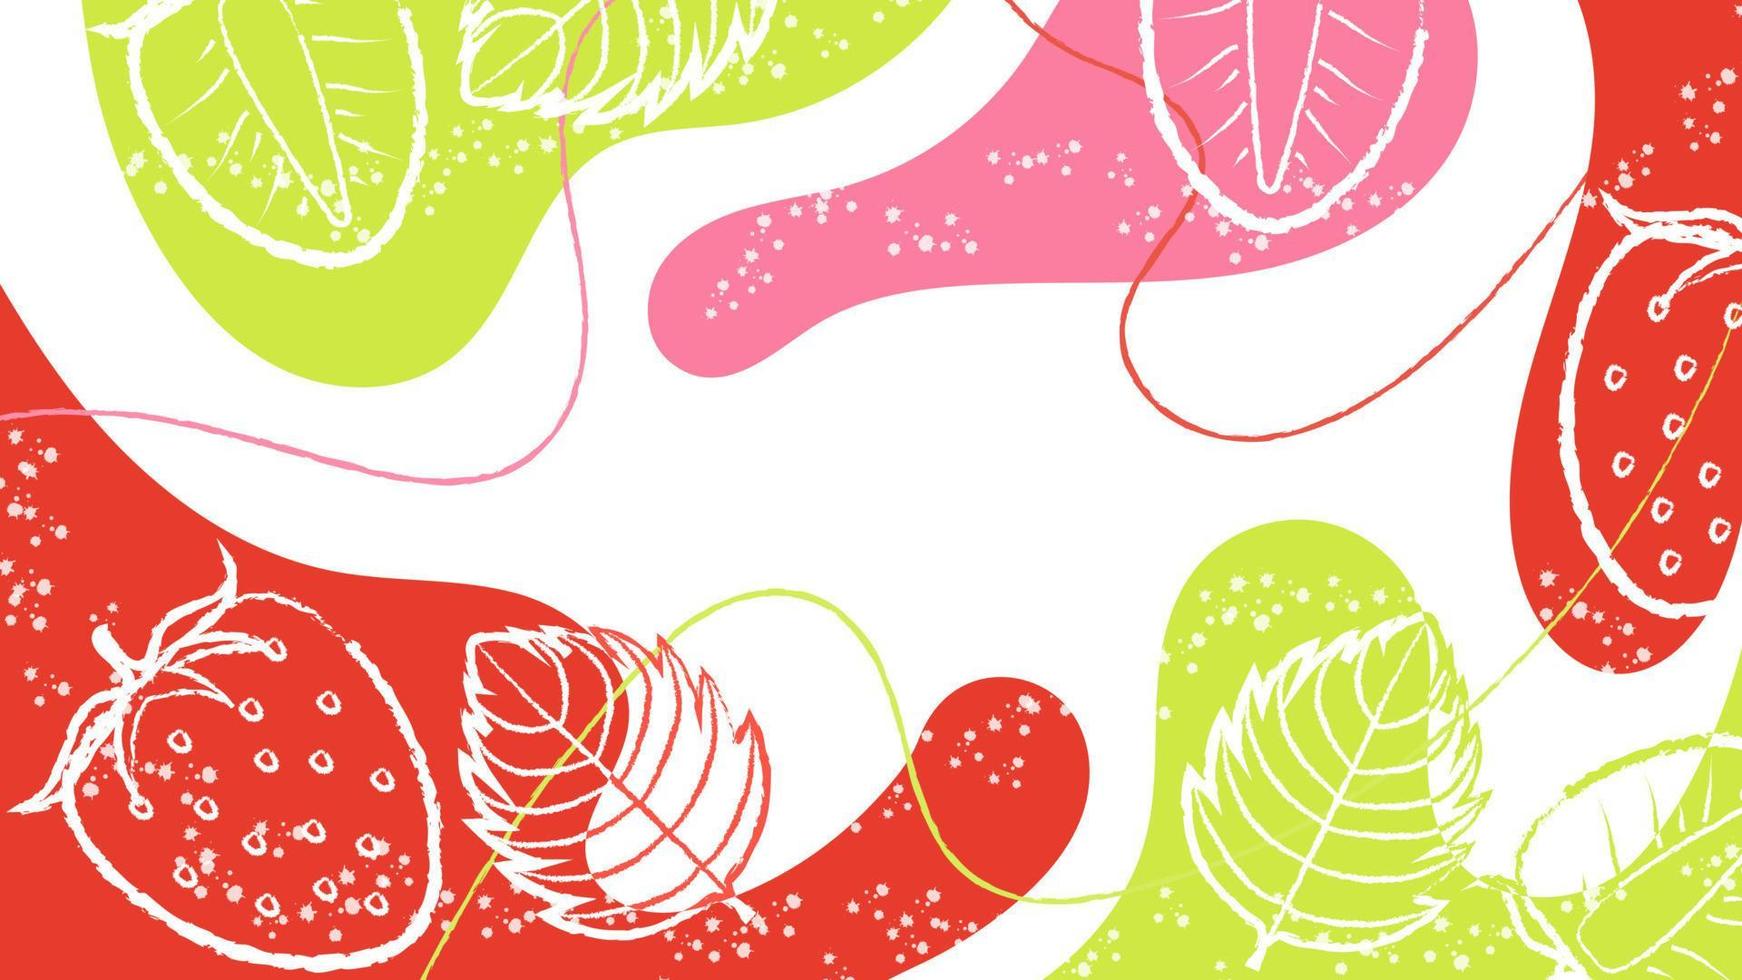 Bright Colorful Background With Abstract Spots, Splashes, Brush Strokes and Graphic Strawberries and Leaves. Perfect for Banners, Social Media Content and Printed Materials vector